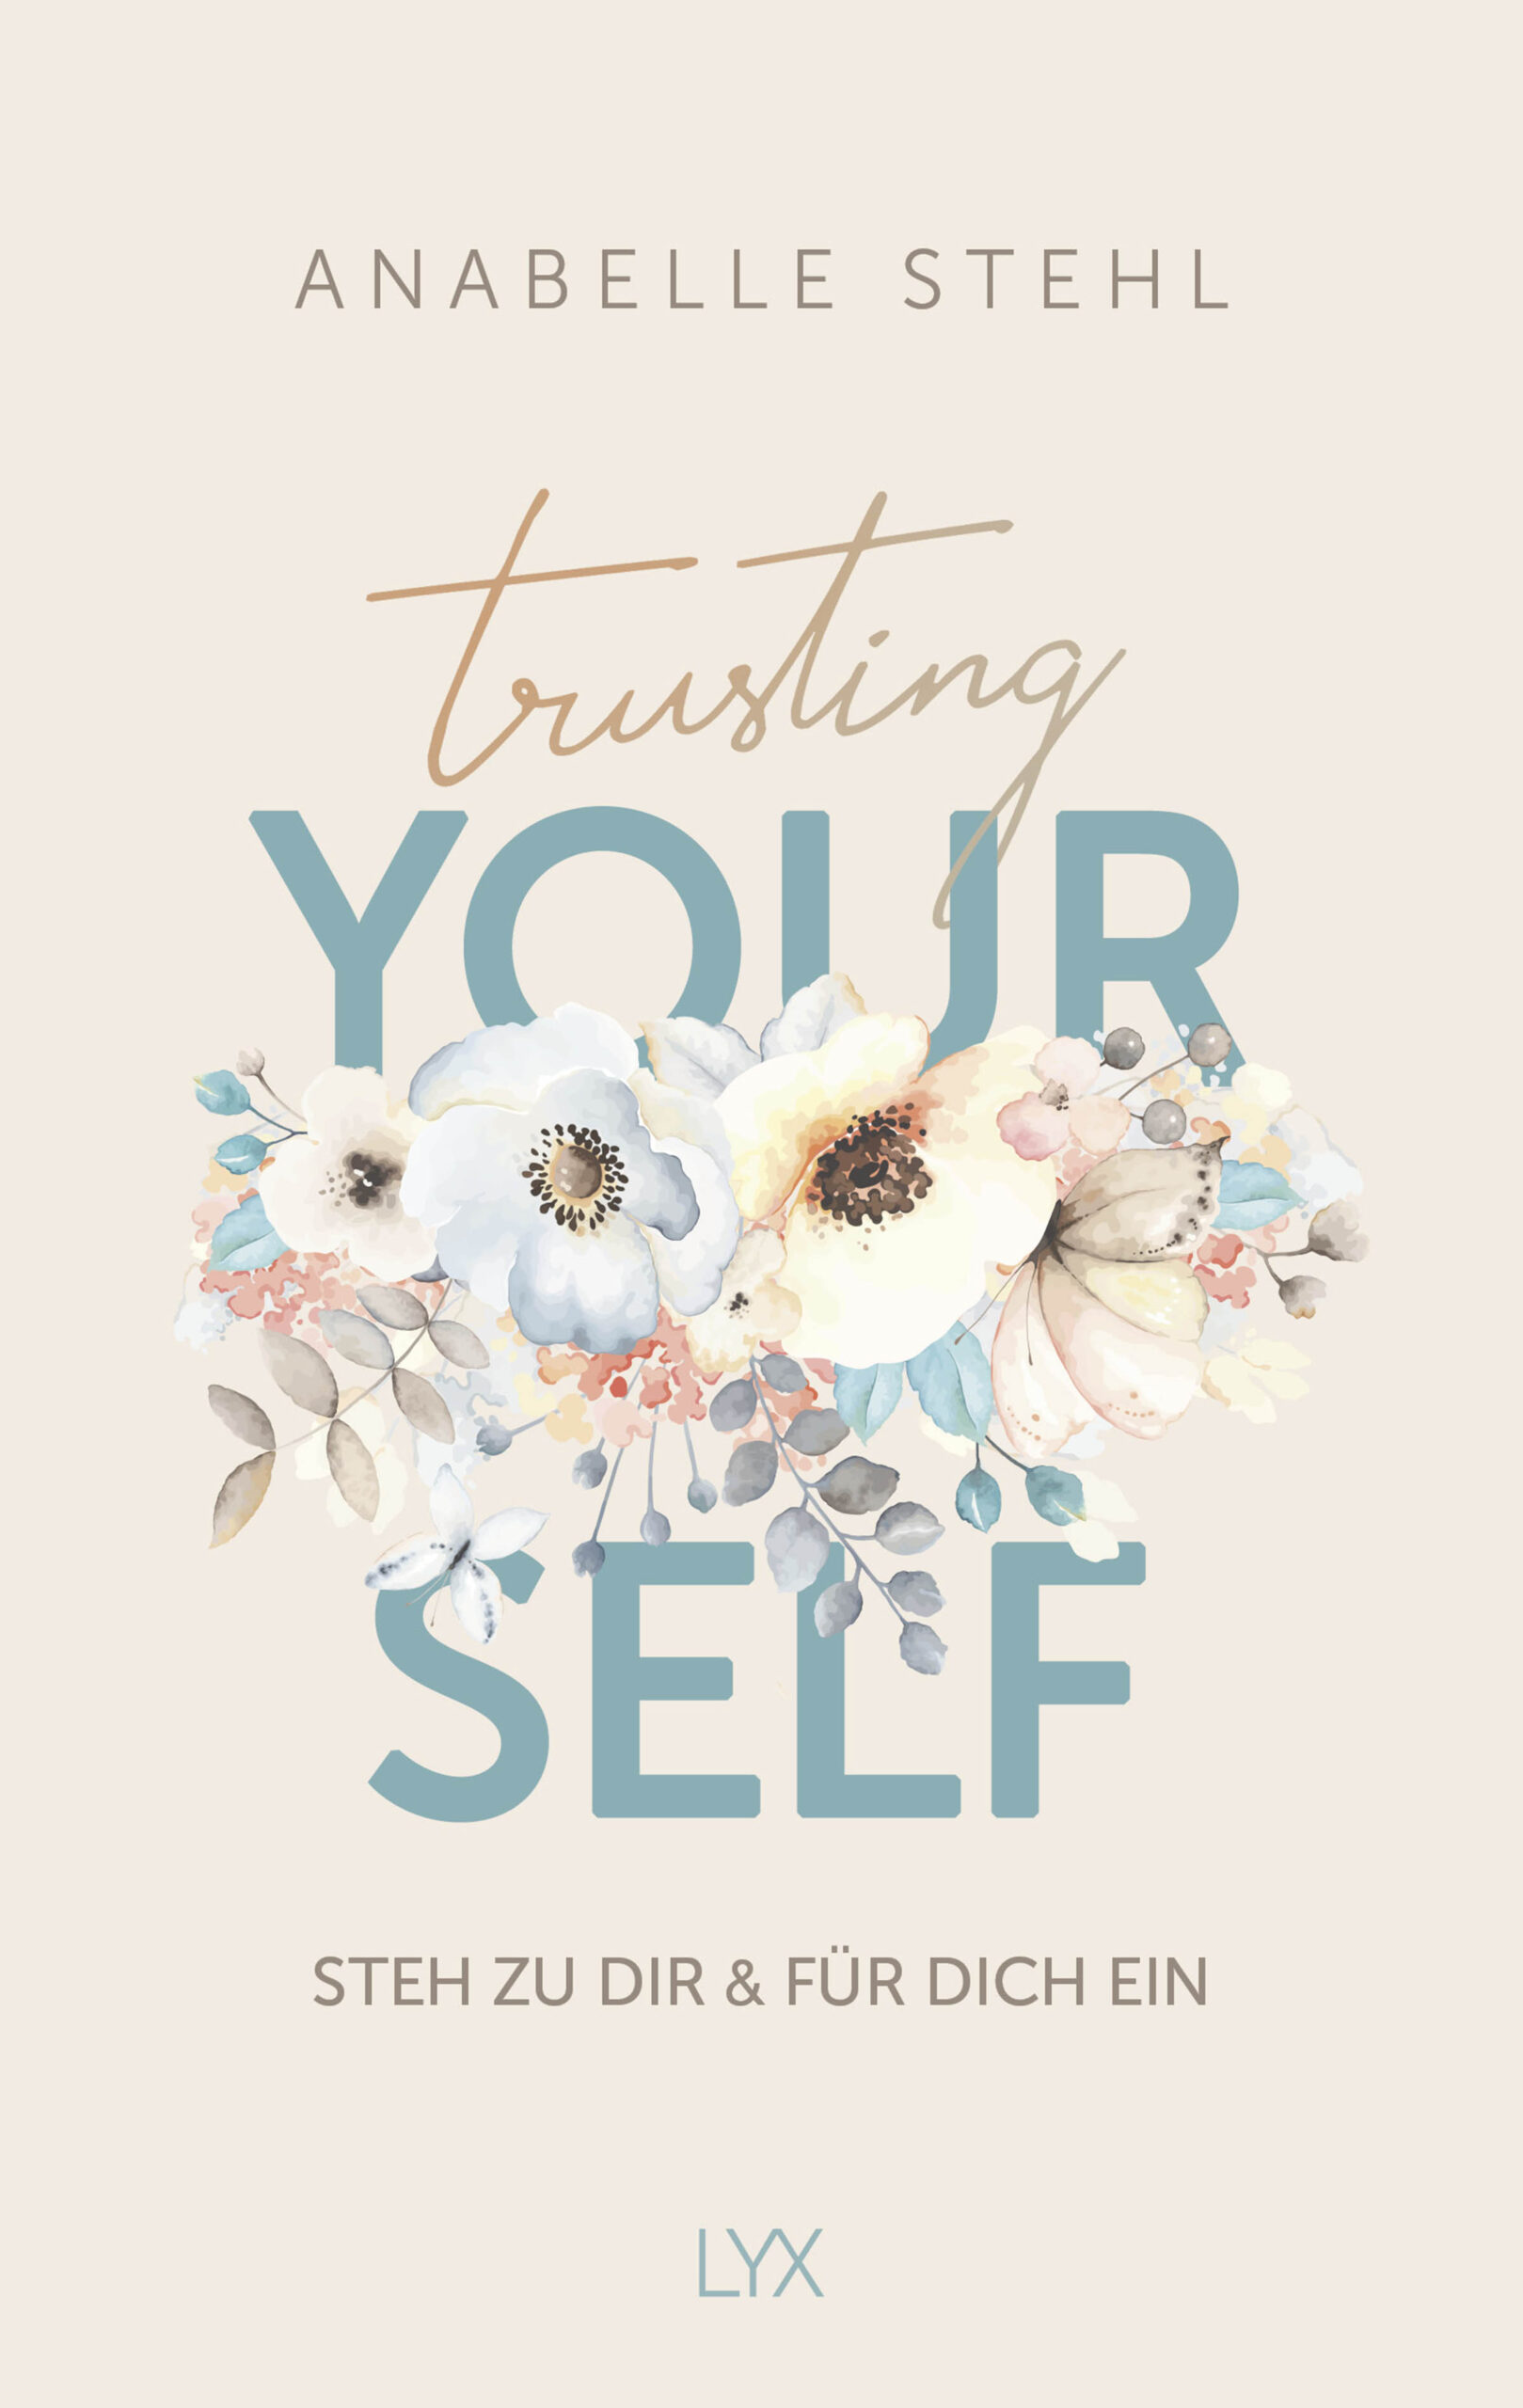 Trusting Yourself